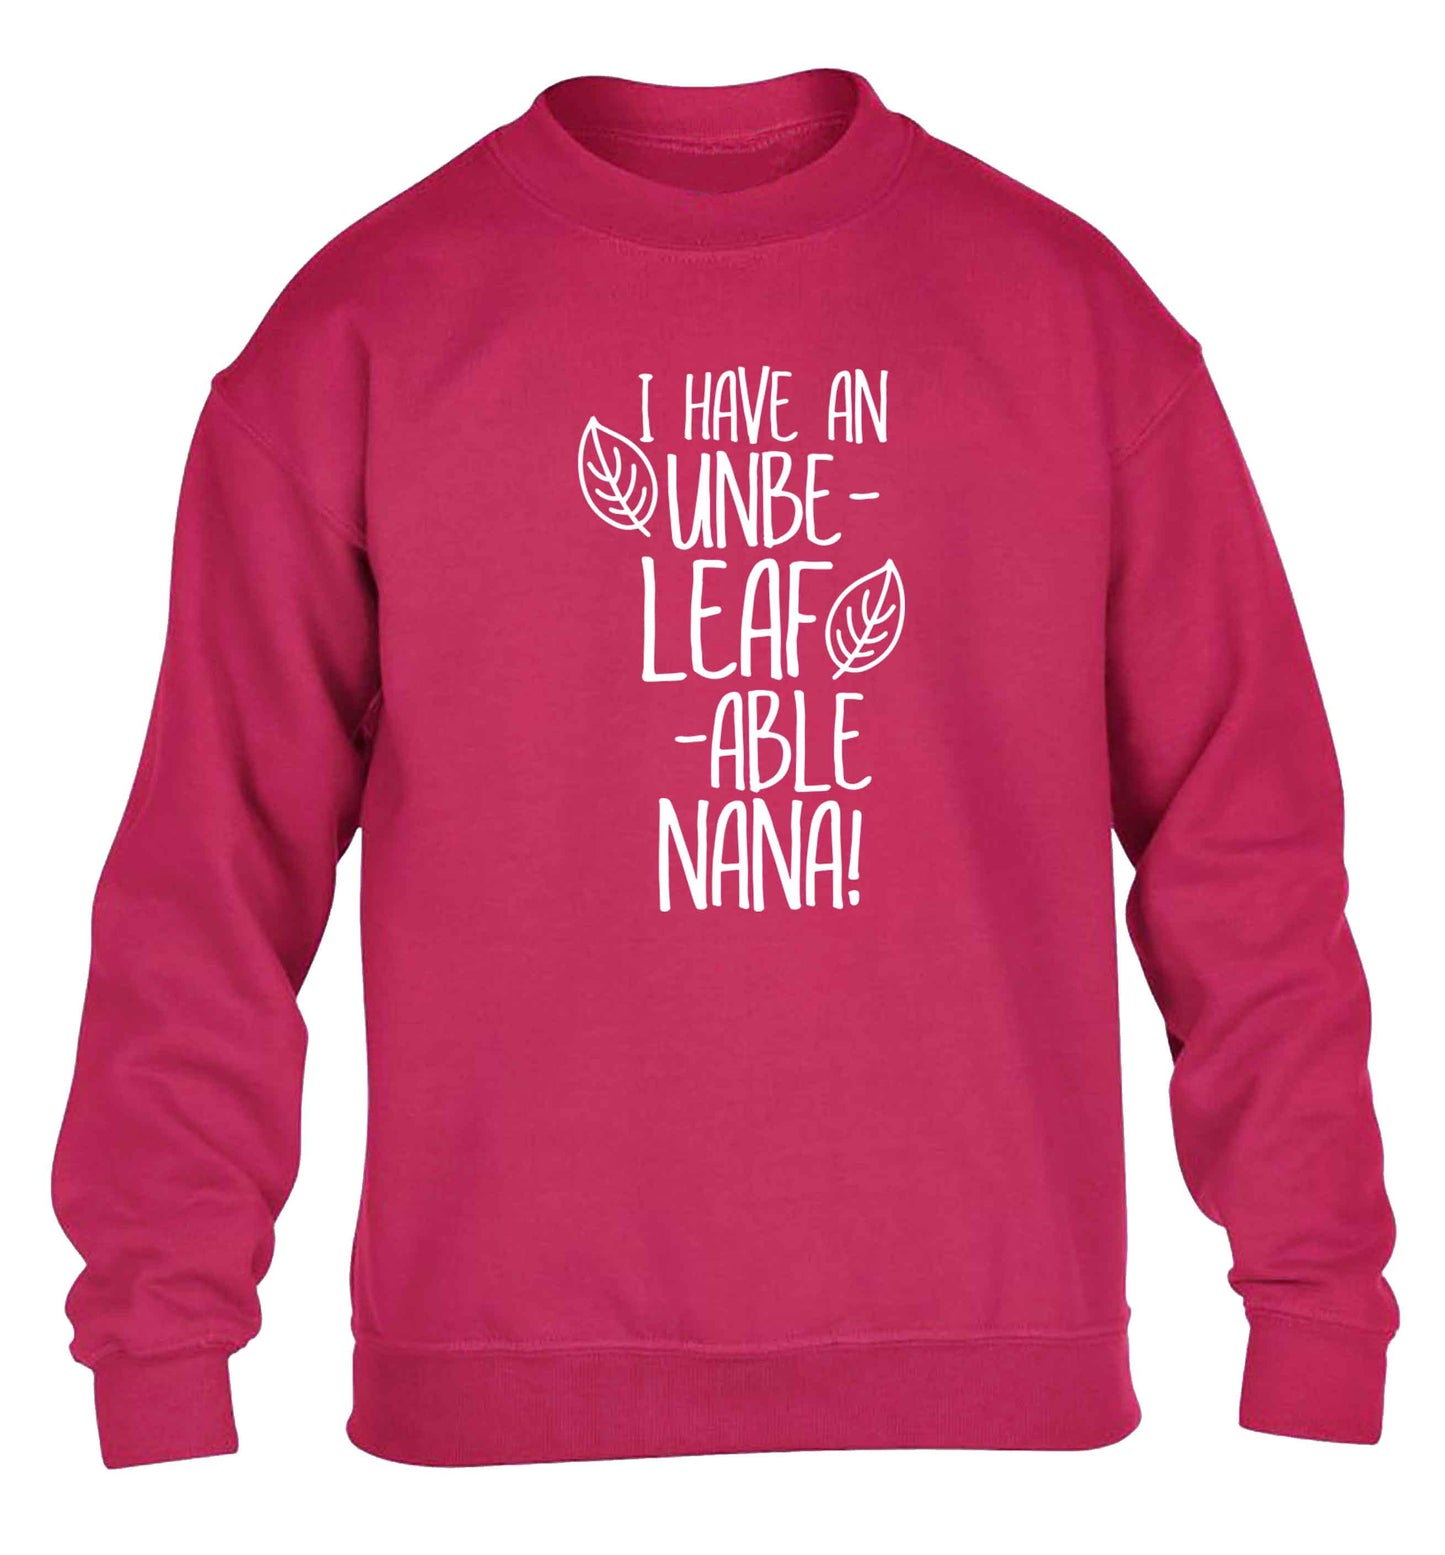 I have an unbe-leaf-able nana children's pink sweater 12-13 Years